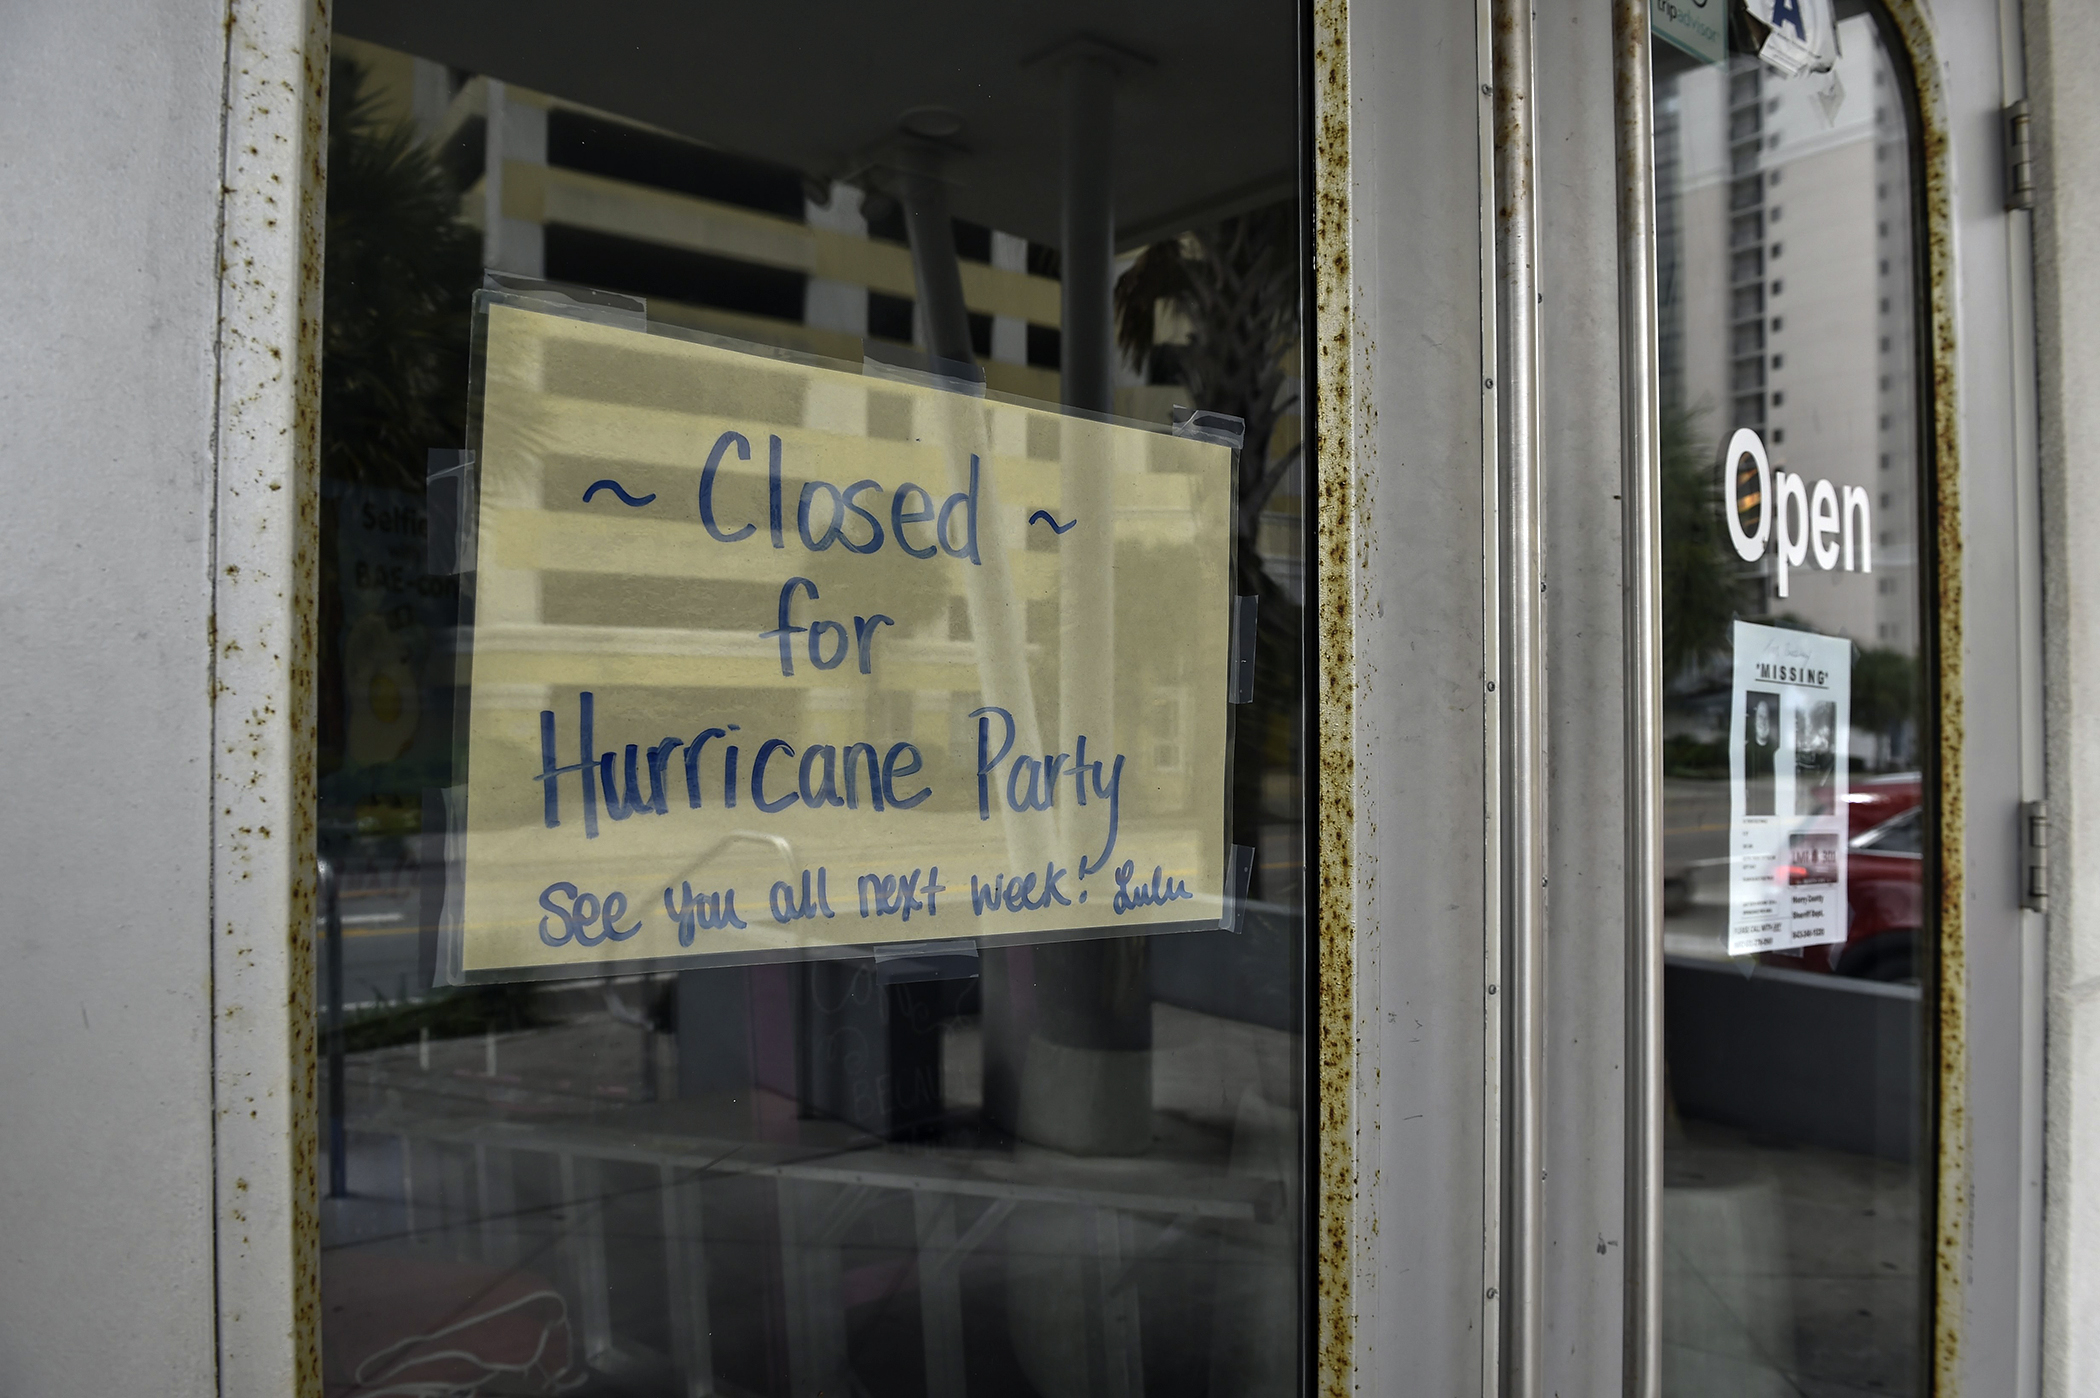 A sign is seen in the door of a cafe in Myrtle Beach, South Carolina on October 6, 2016 as Hurricane Matthew makes its way towards the United States.